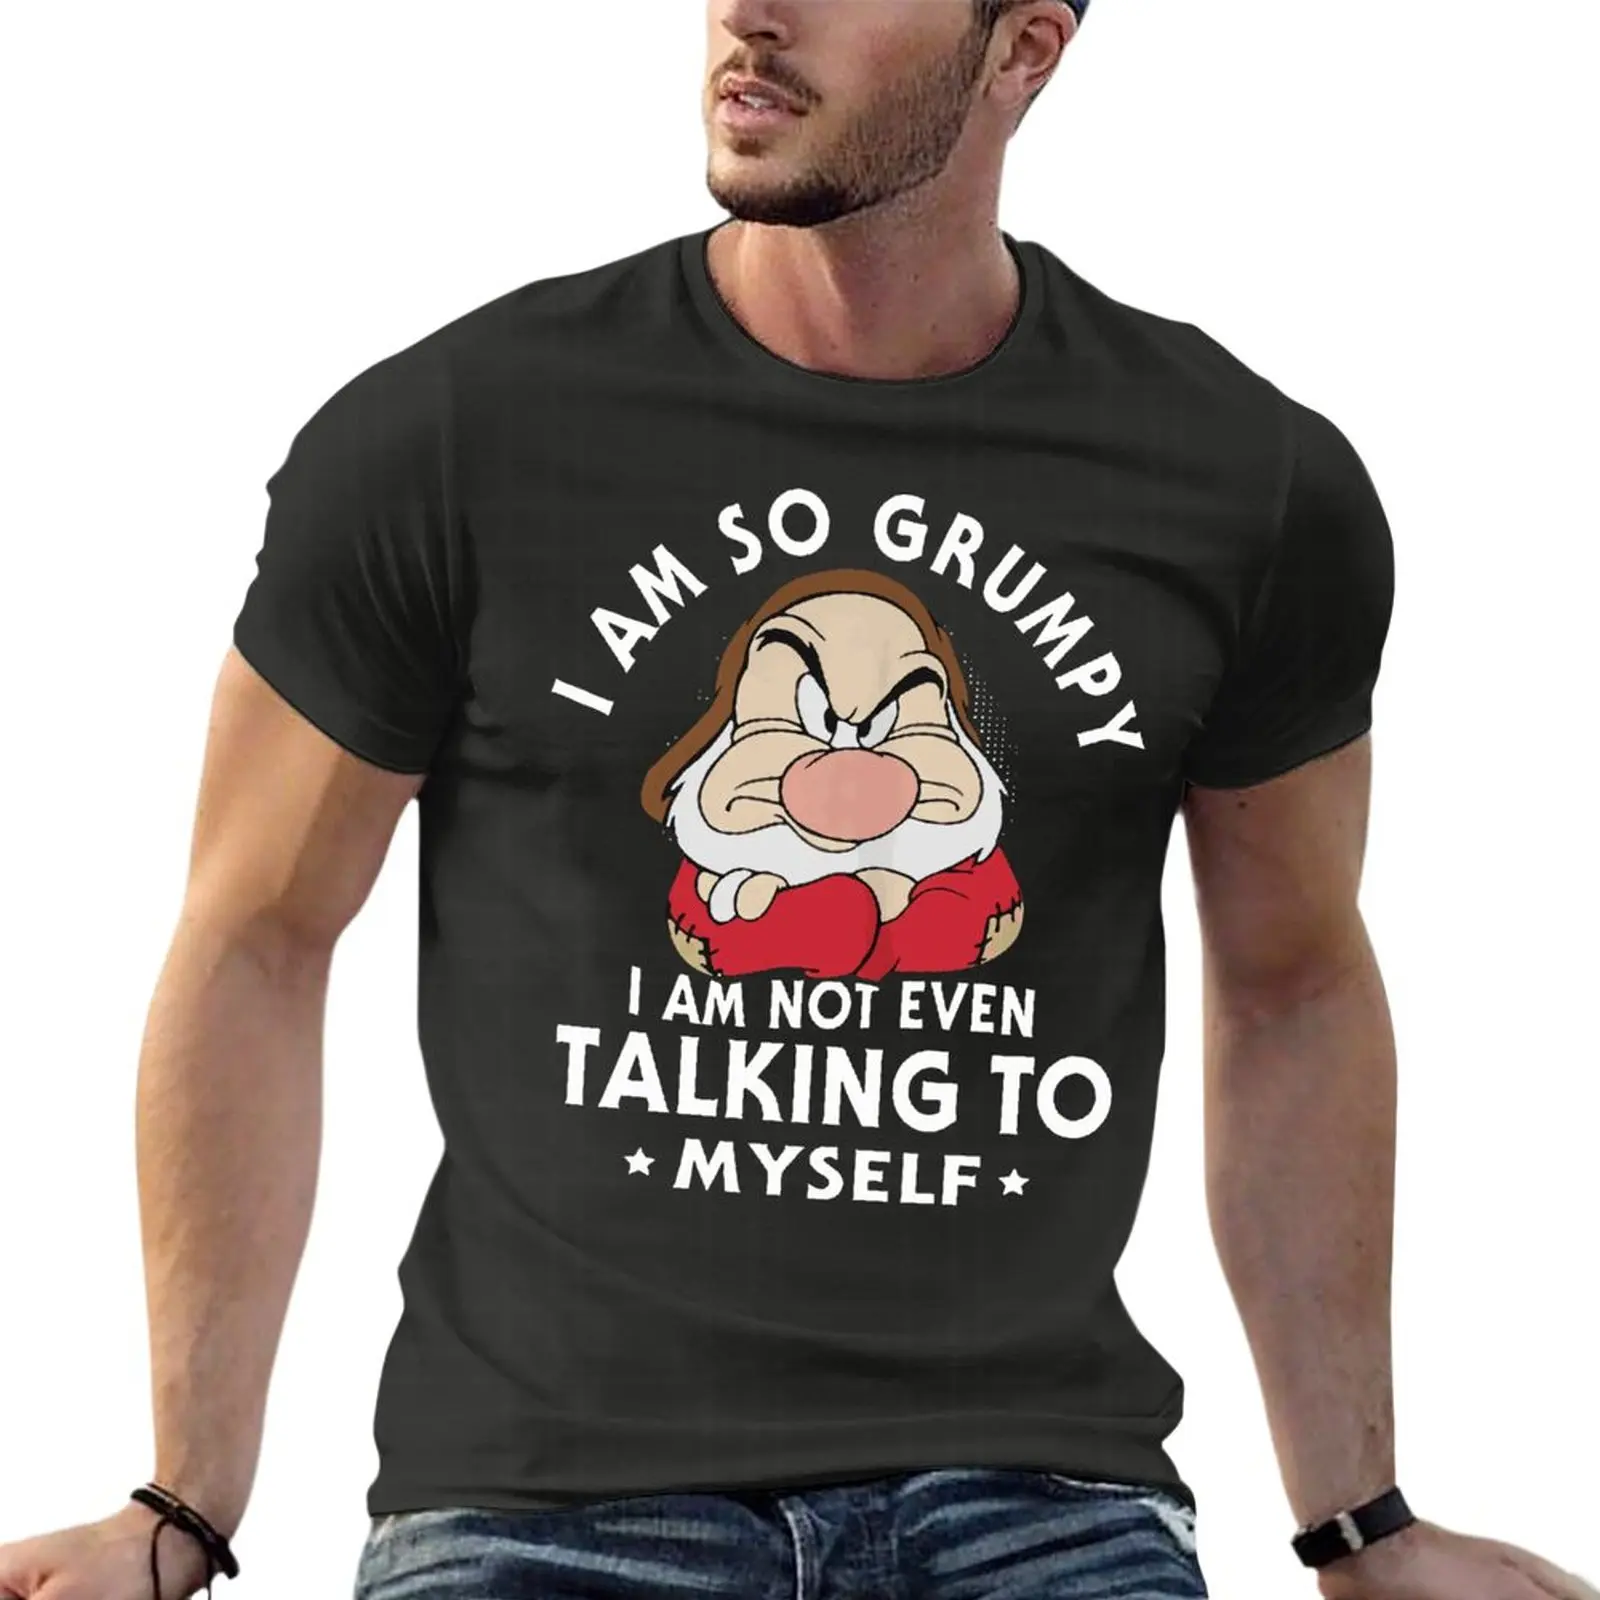 

I Am So Grumpy I Am Not Even Talking To Myself - Grumpy Dwarf Oversize T Shirts Personalized Mens Clothes Short Sleeve Top Tee